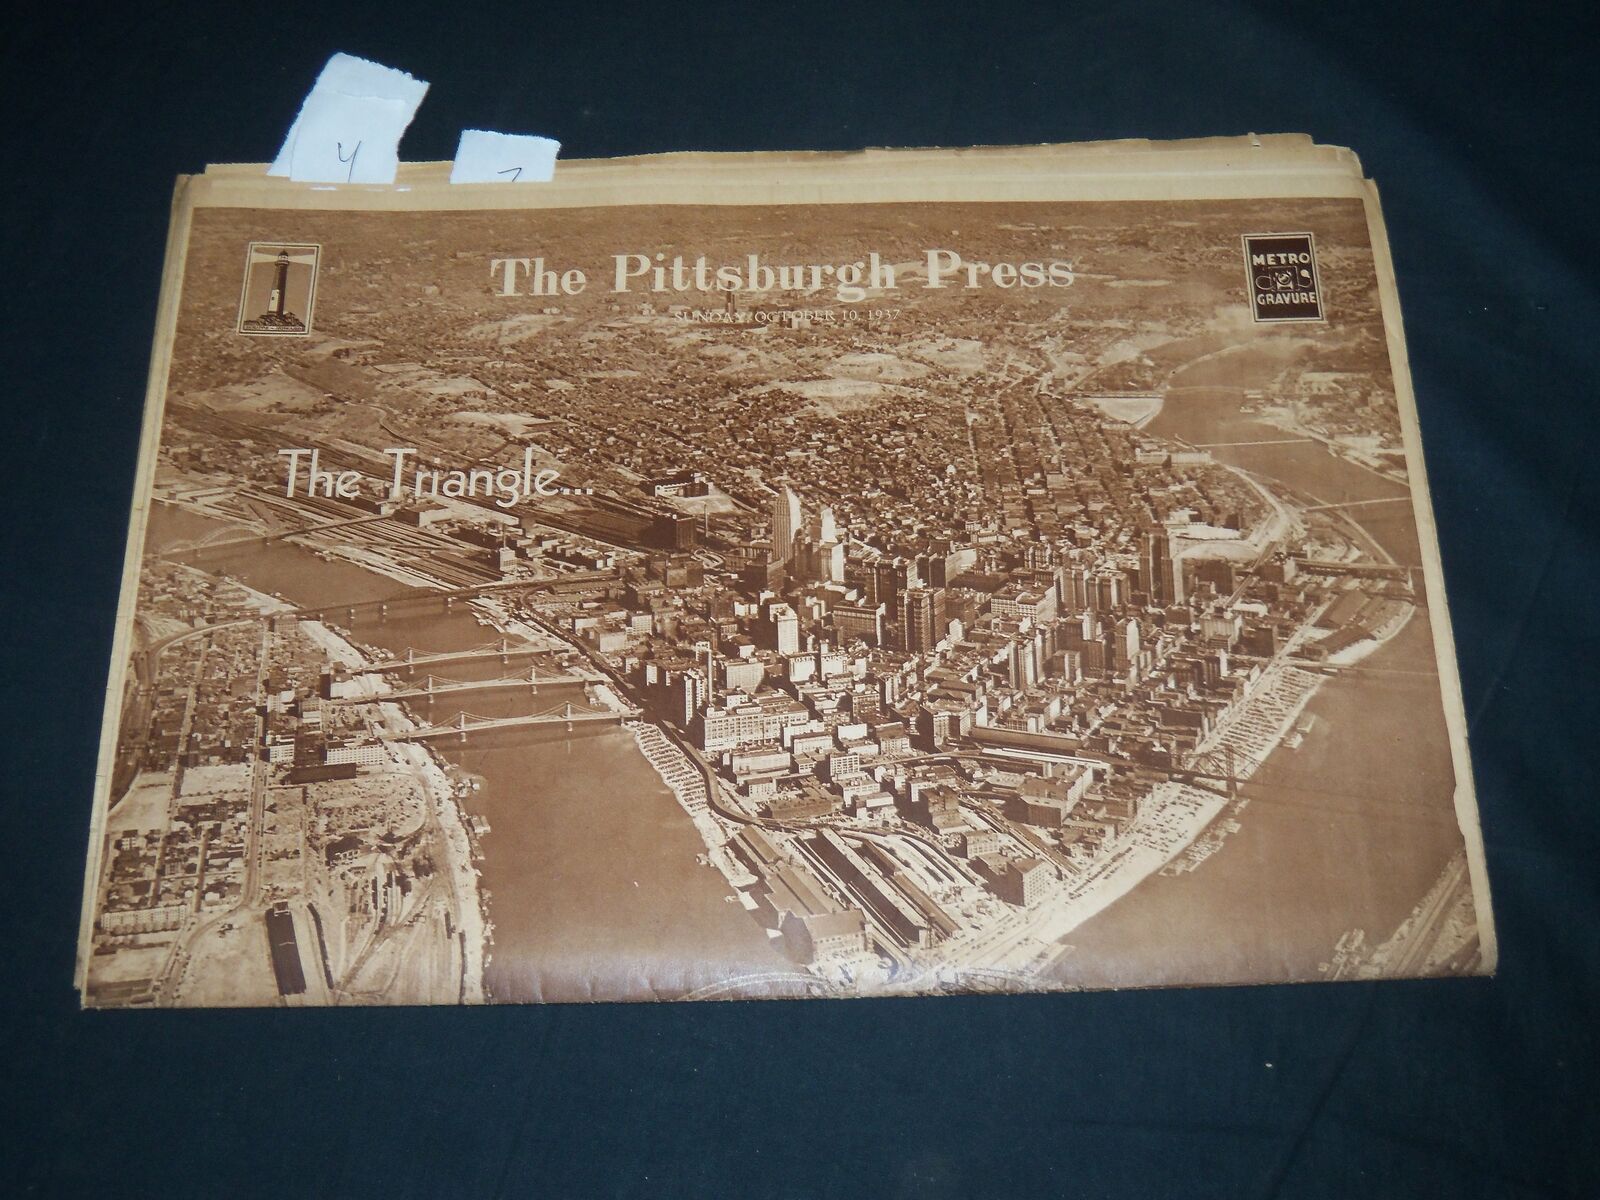 1937 OCT 20 THE PITTSBURGH PRESS SUNDAY ROTO SECTION - THE TRIANGLE - NP 4532